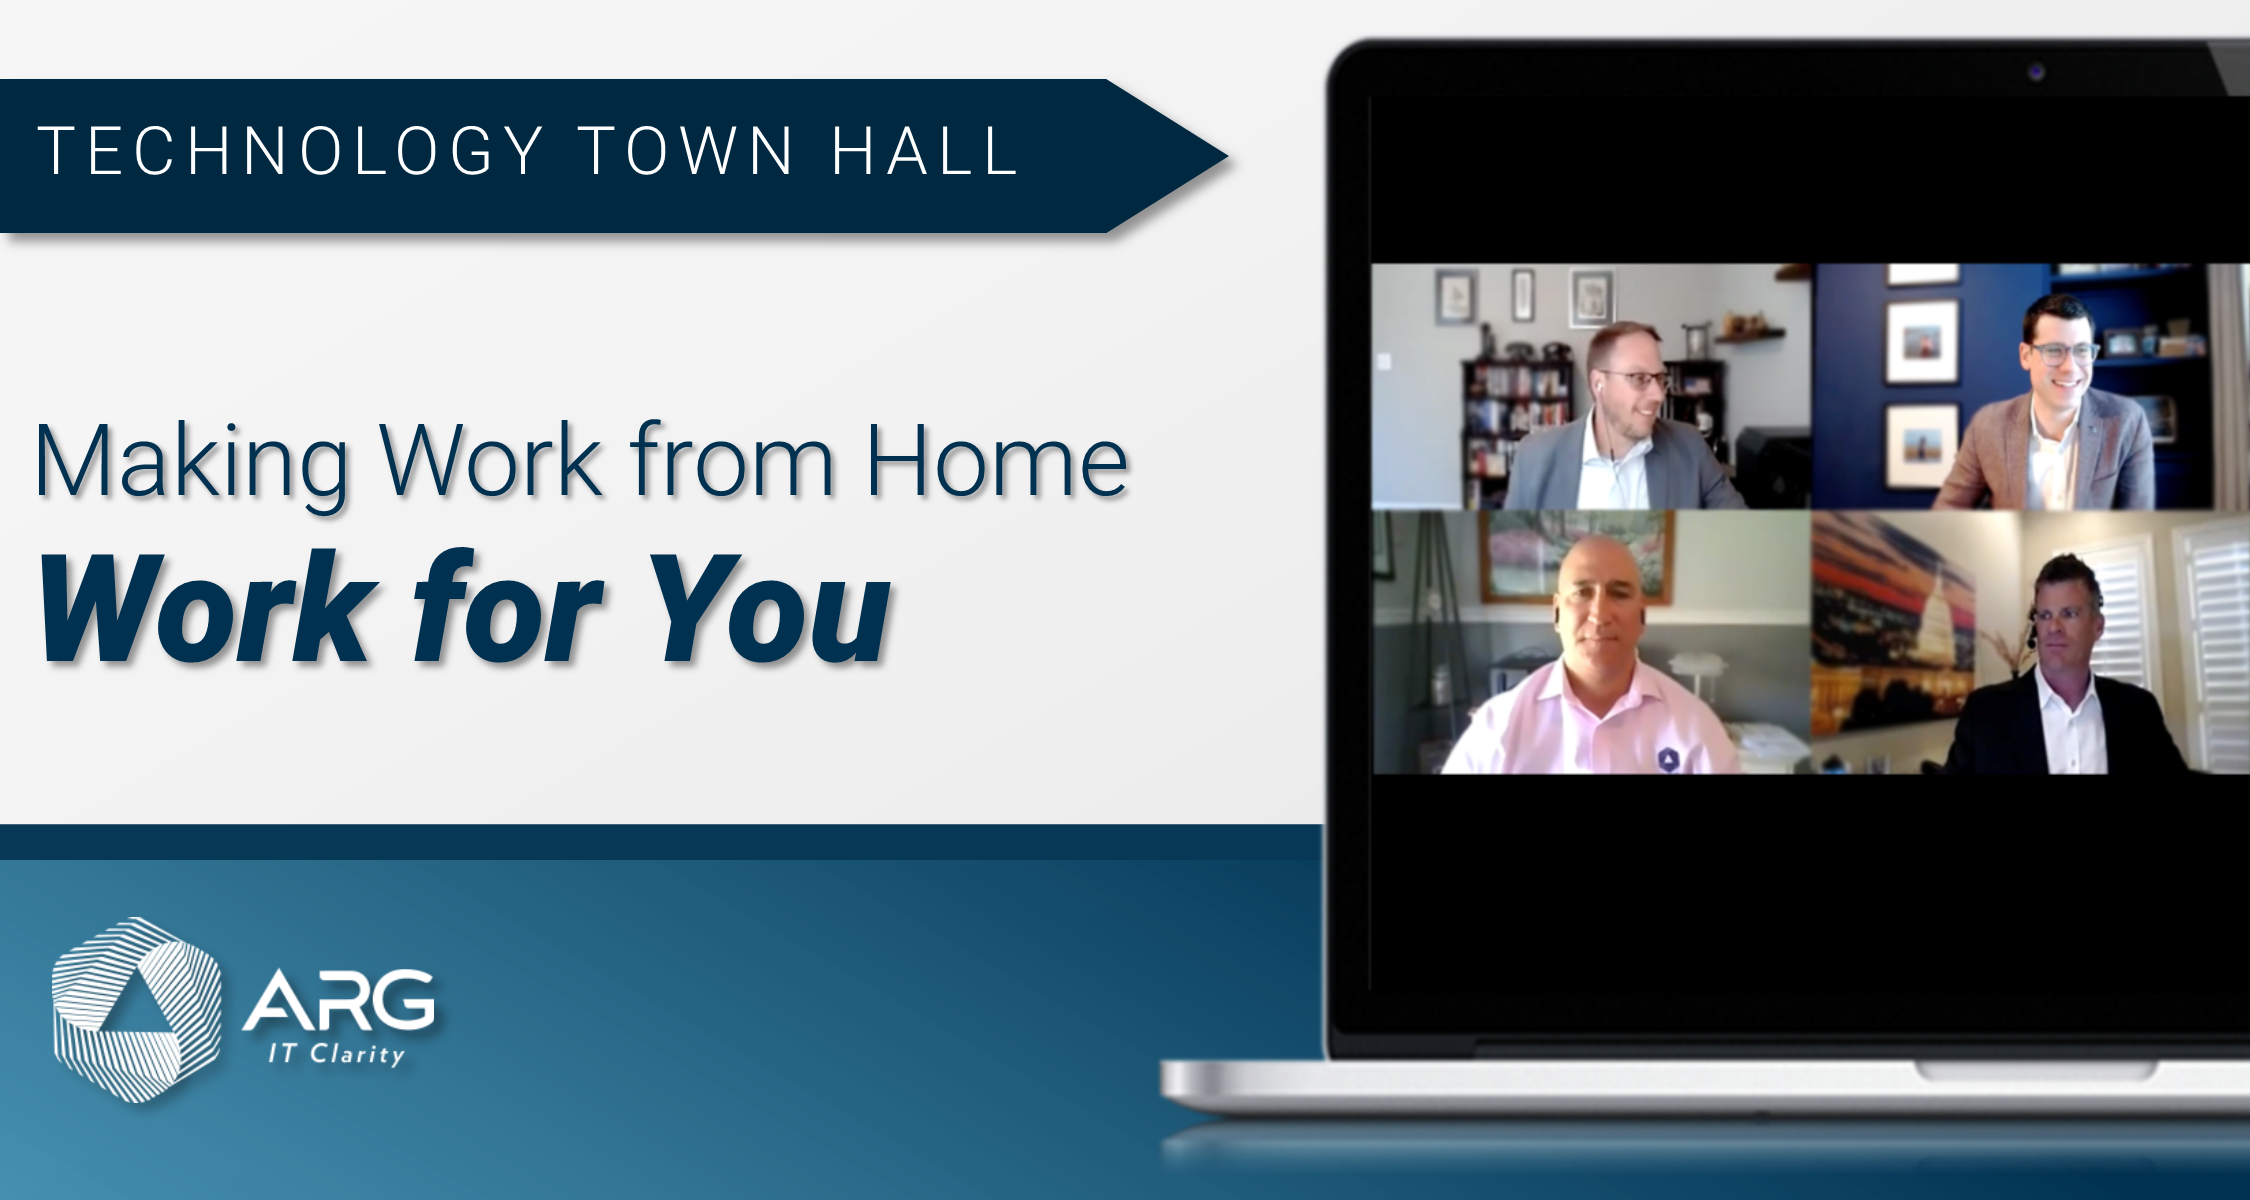 Technology Town Hall: Making Work from Home Work for You